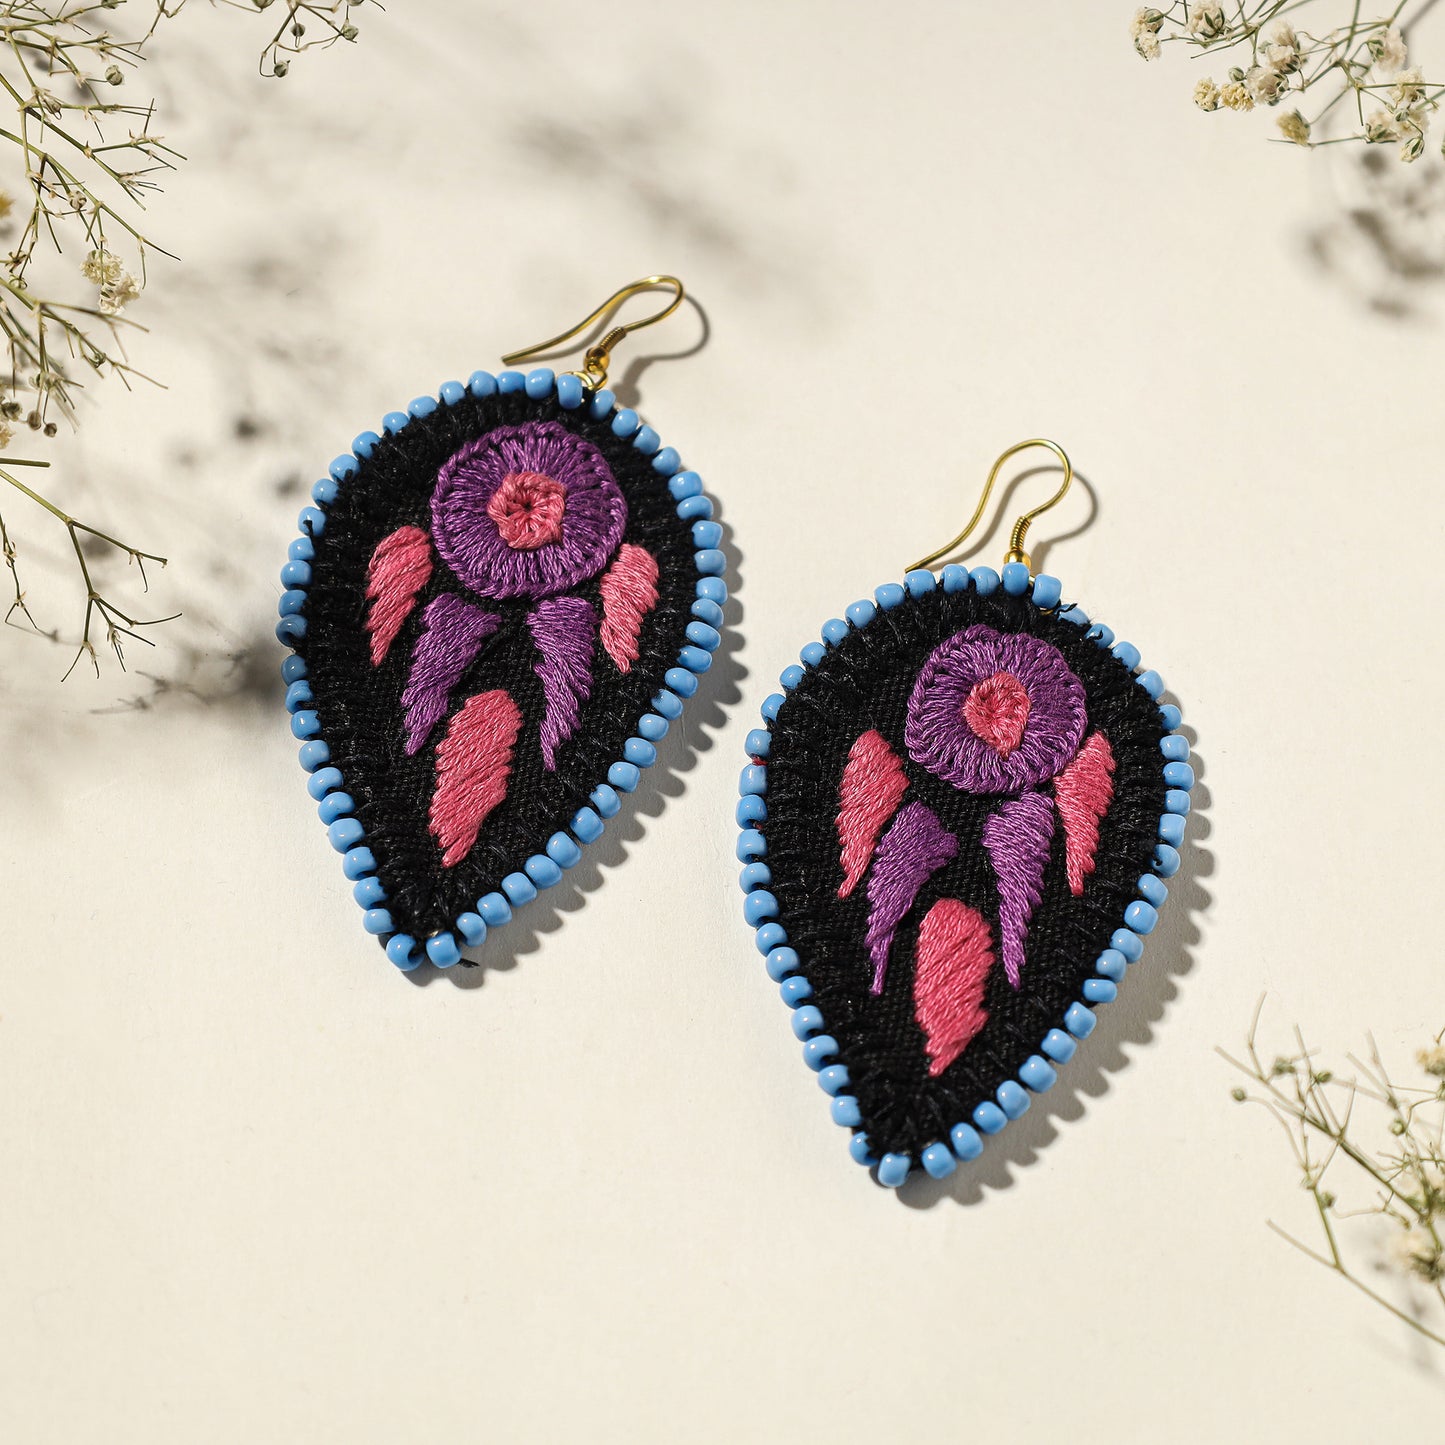 embroidered  earrings